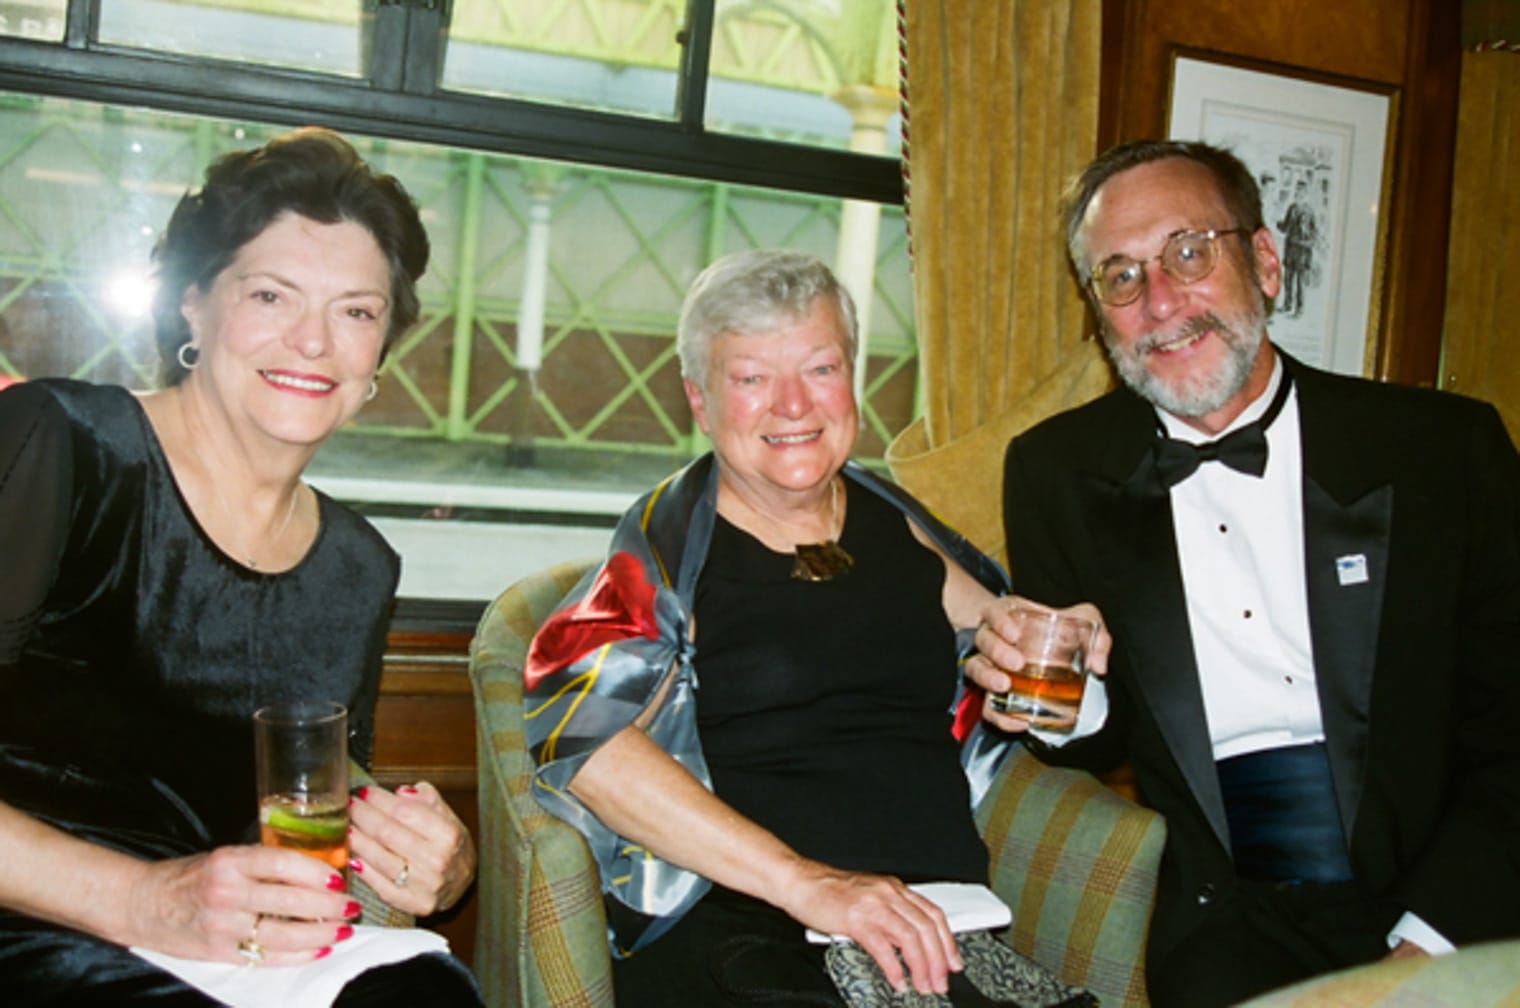 IRT Society travelers enjoy the Royal Scotsman's rear lounge car on the Clans, Castles & Isles journey